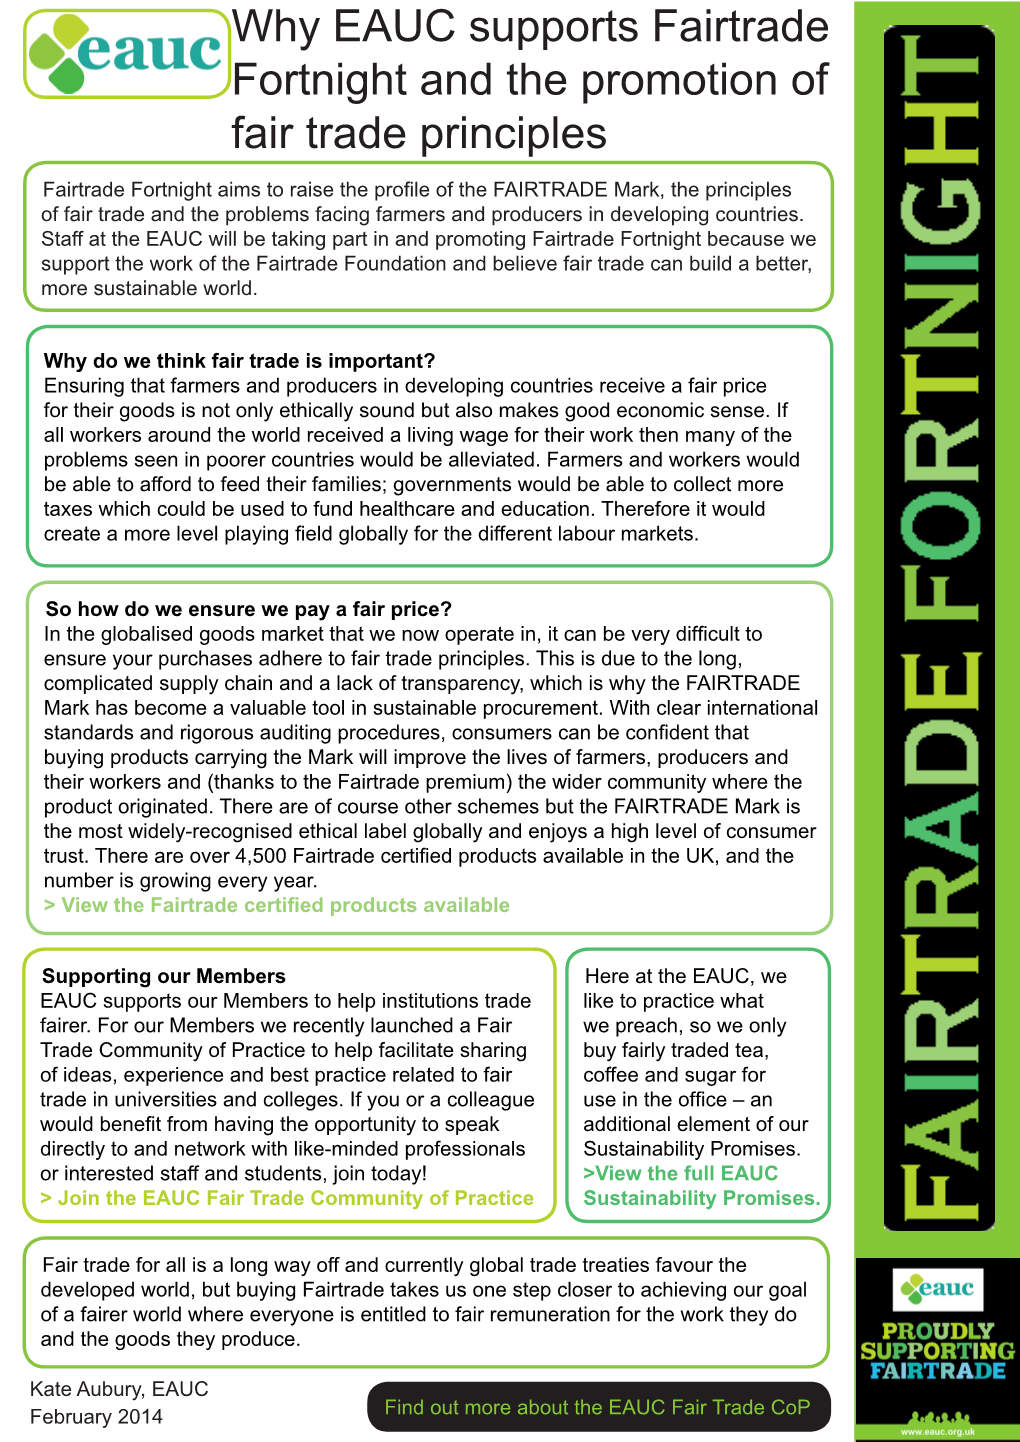 Why EAUC Supports Fairtrade Fortnight and the Promotion of Fair Trade Principles